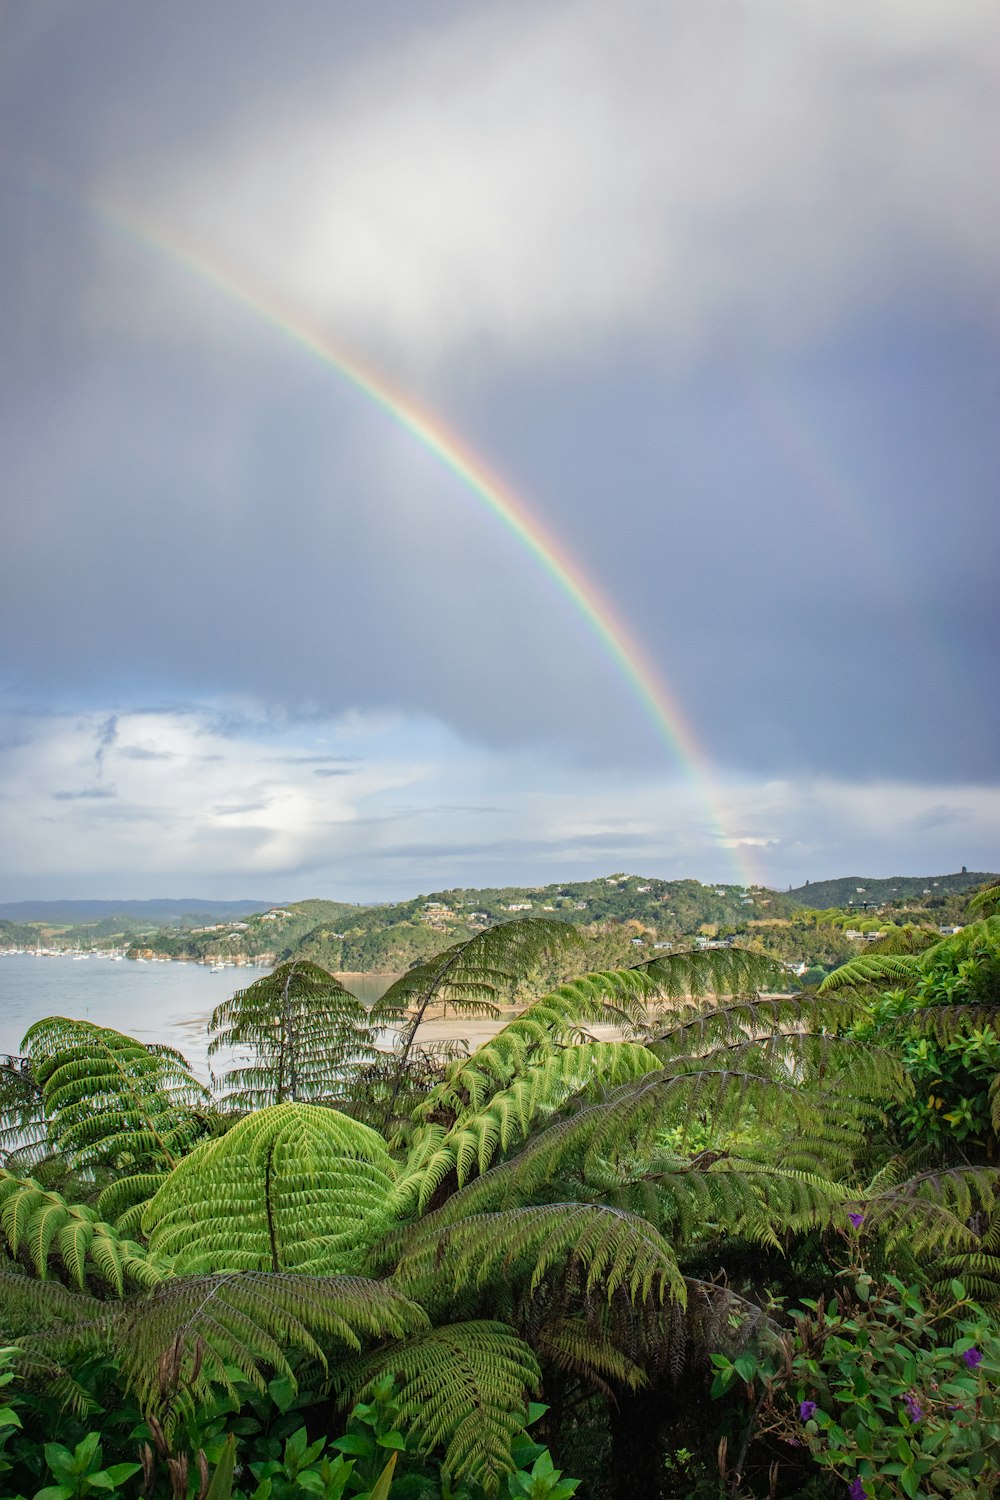 a rainbow shines in the sky above a lush green forest